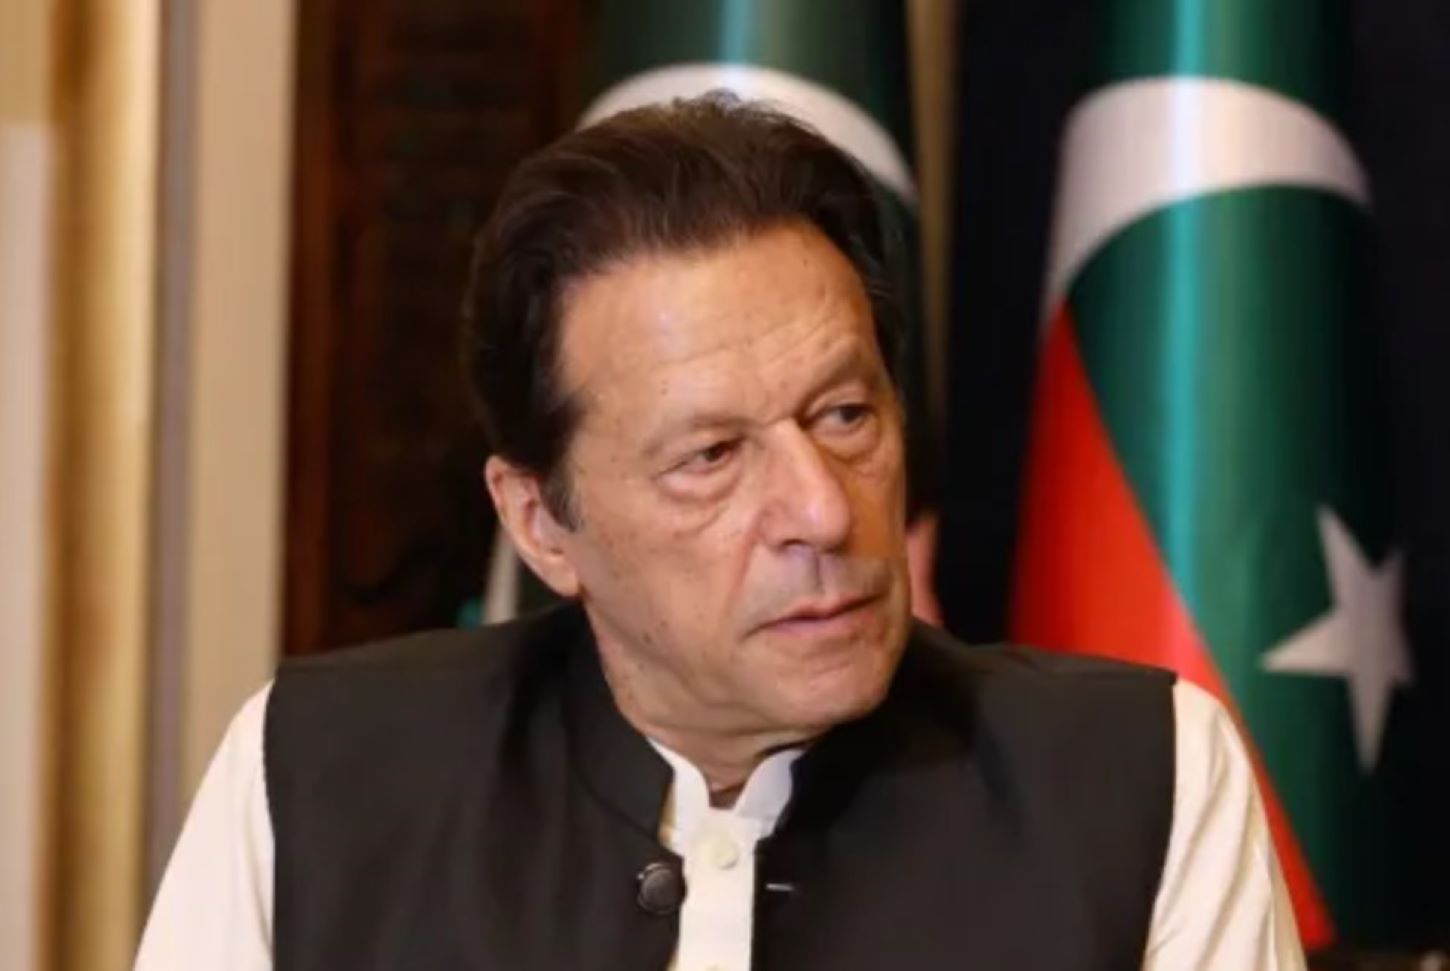 Imran Khan, FMR PM of Pakistan calls to end corruption, invite investment